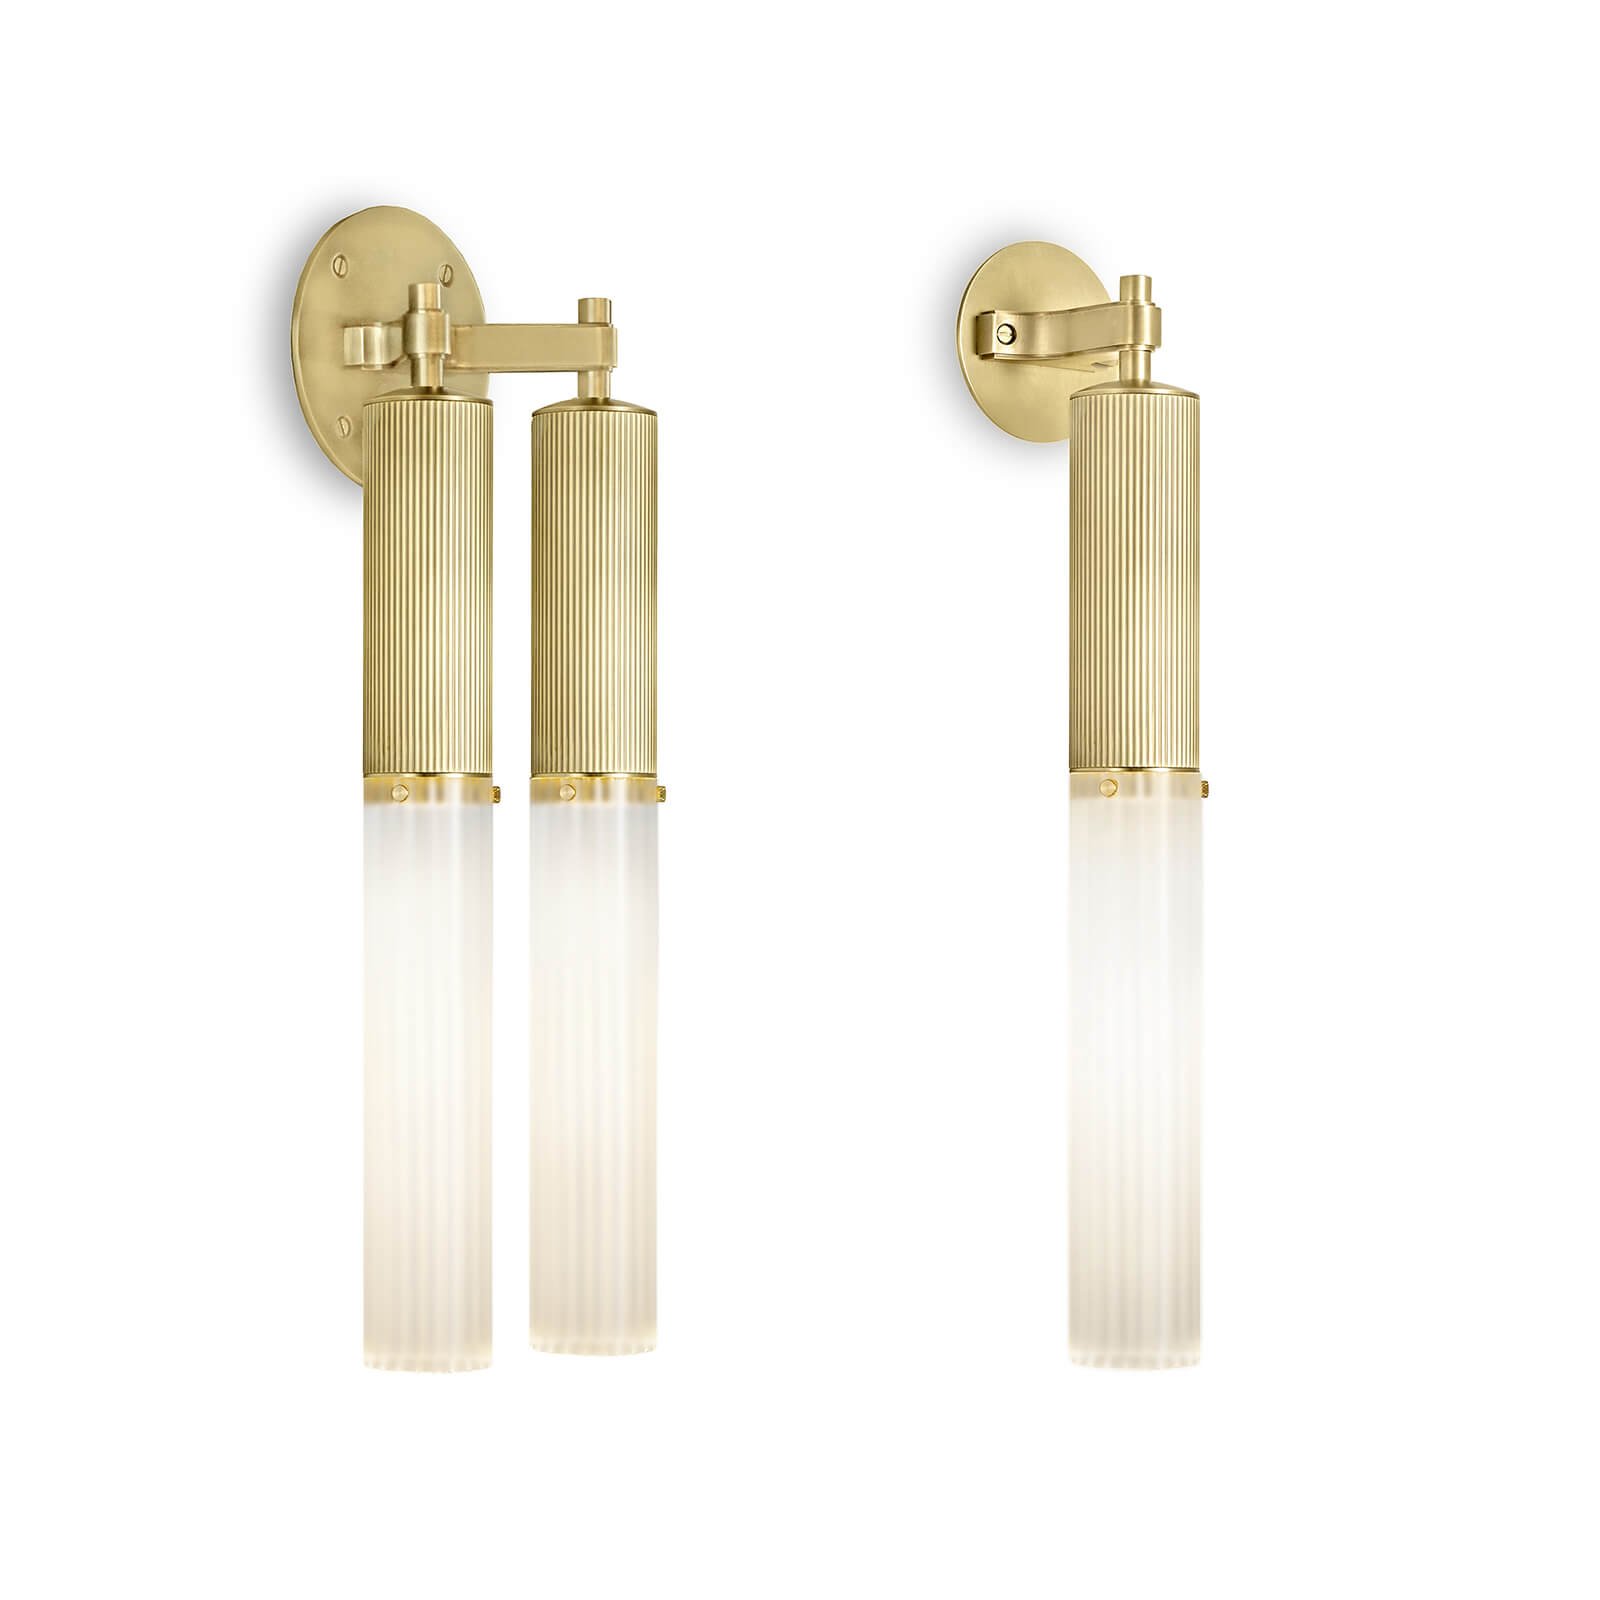 Flume Double Wall Light_Satin Brass_Frosted Reeded Glass.jpg